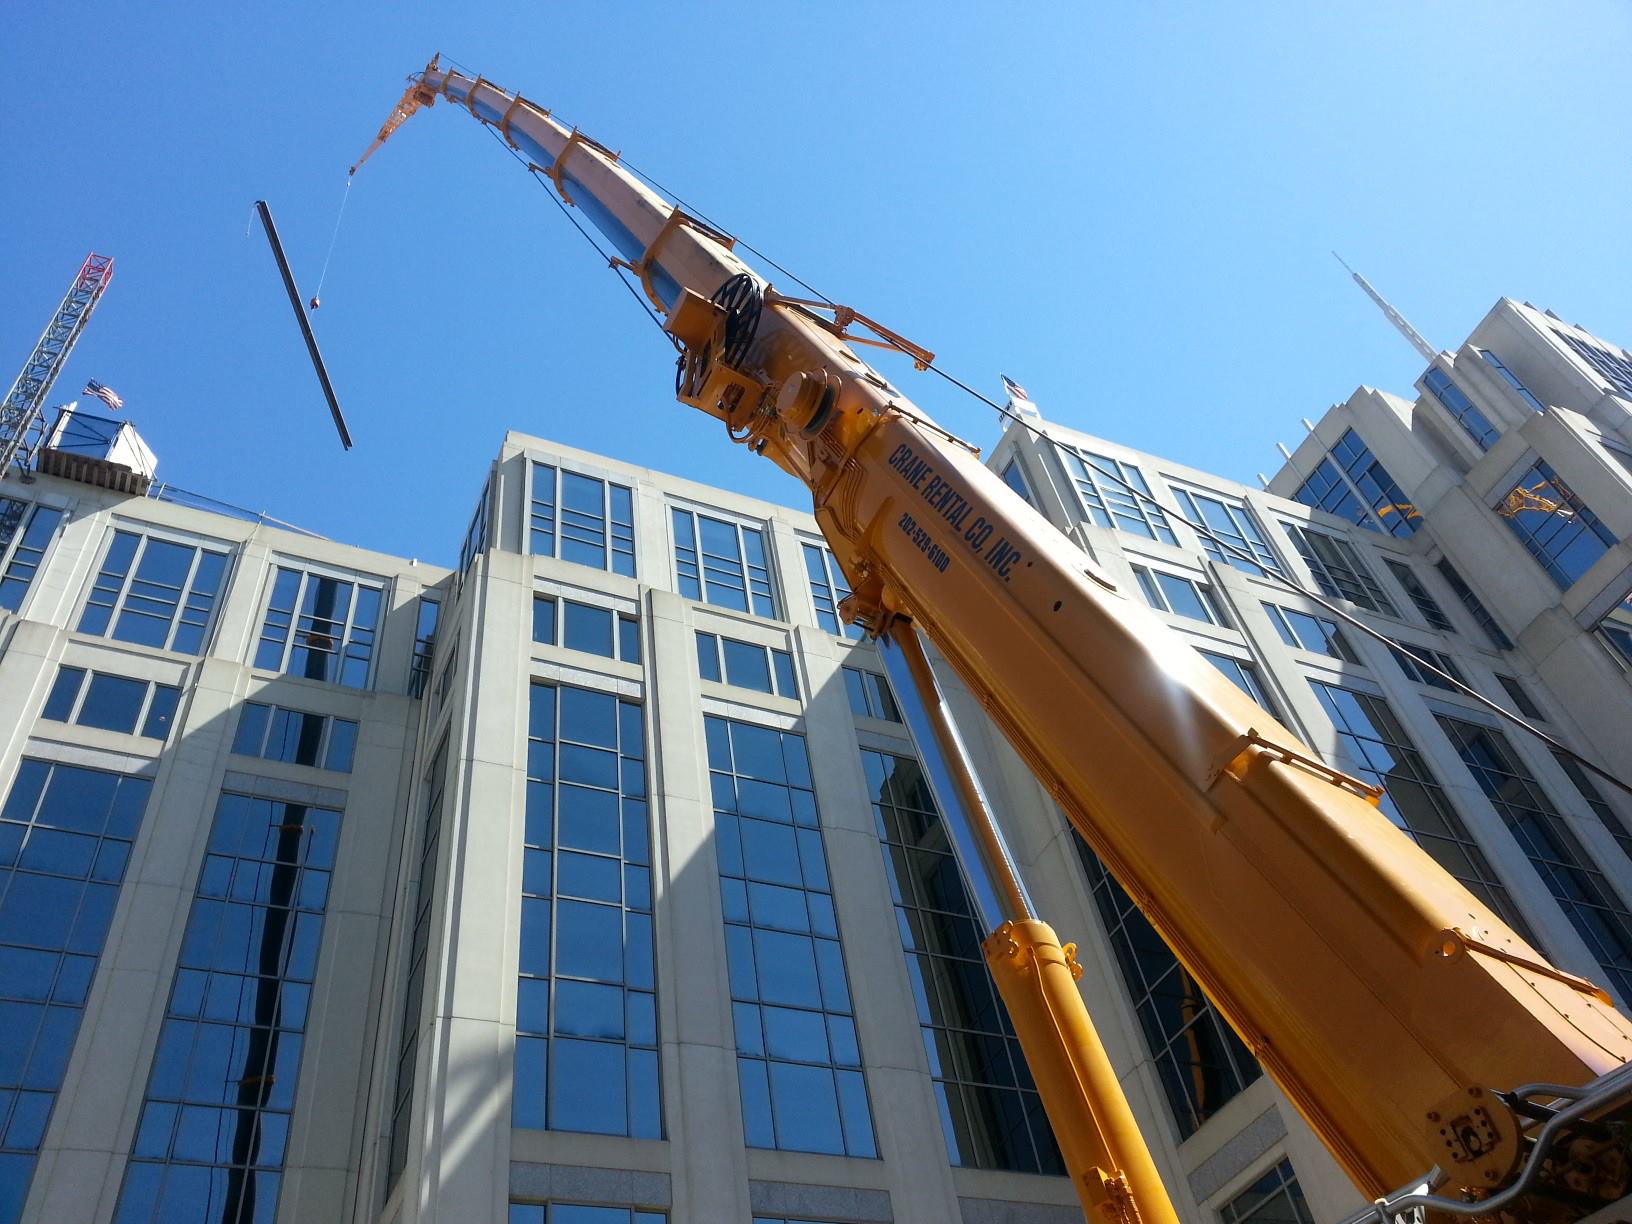 Crane Rental Company lifting beams on top of large building in Washington, D.C.